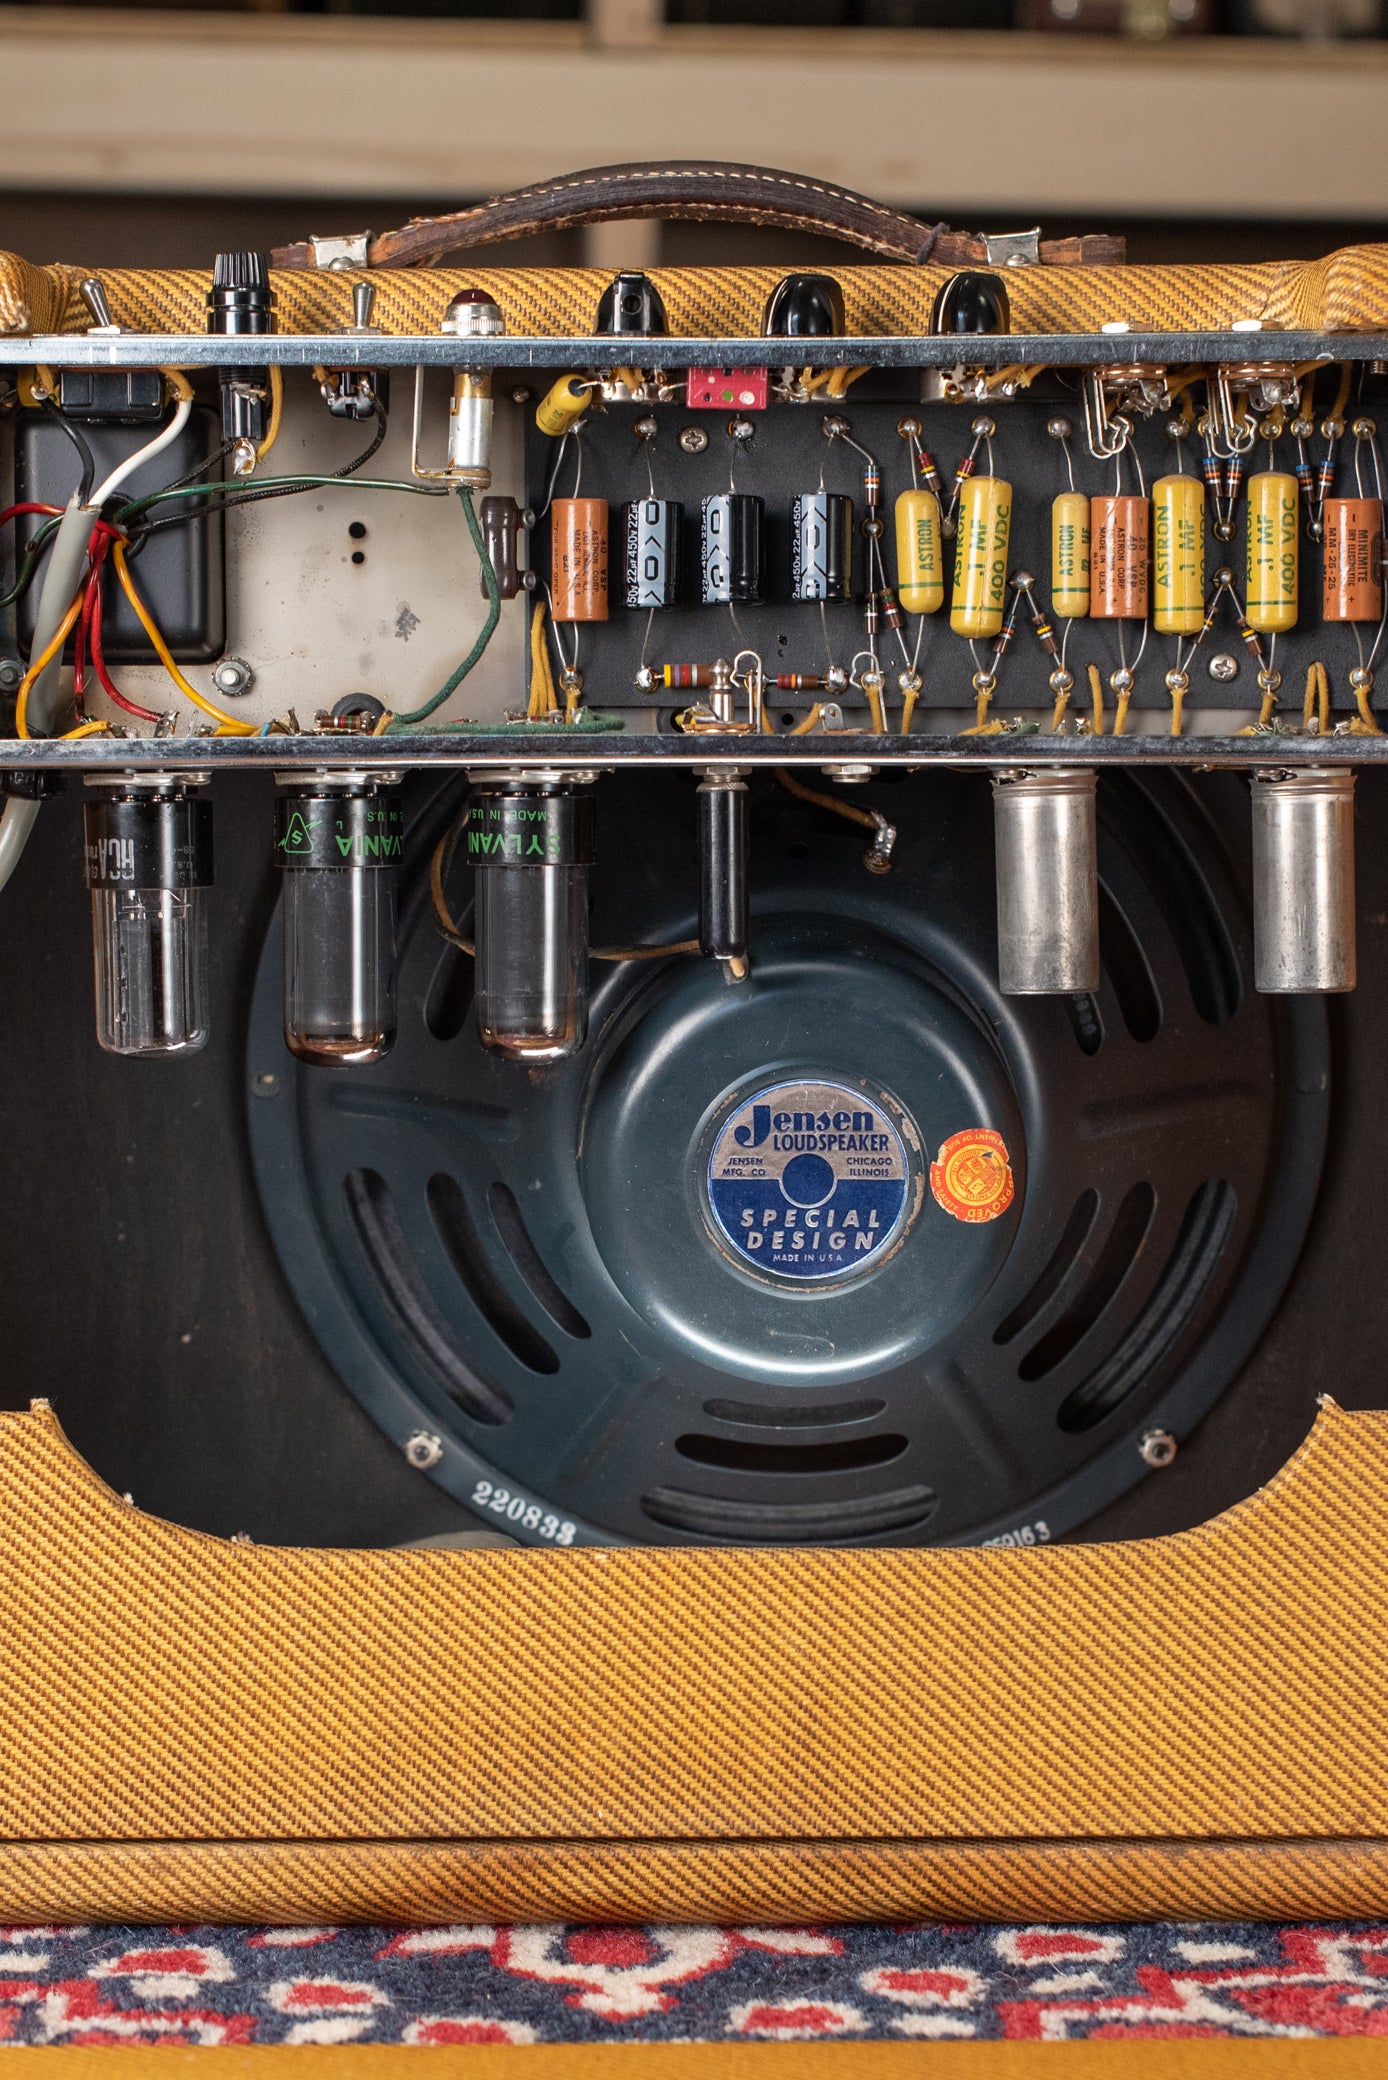 1958 Fender Deluxe amp chassis circuit